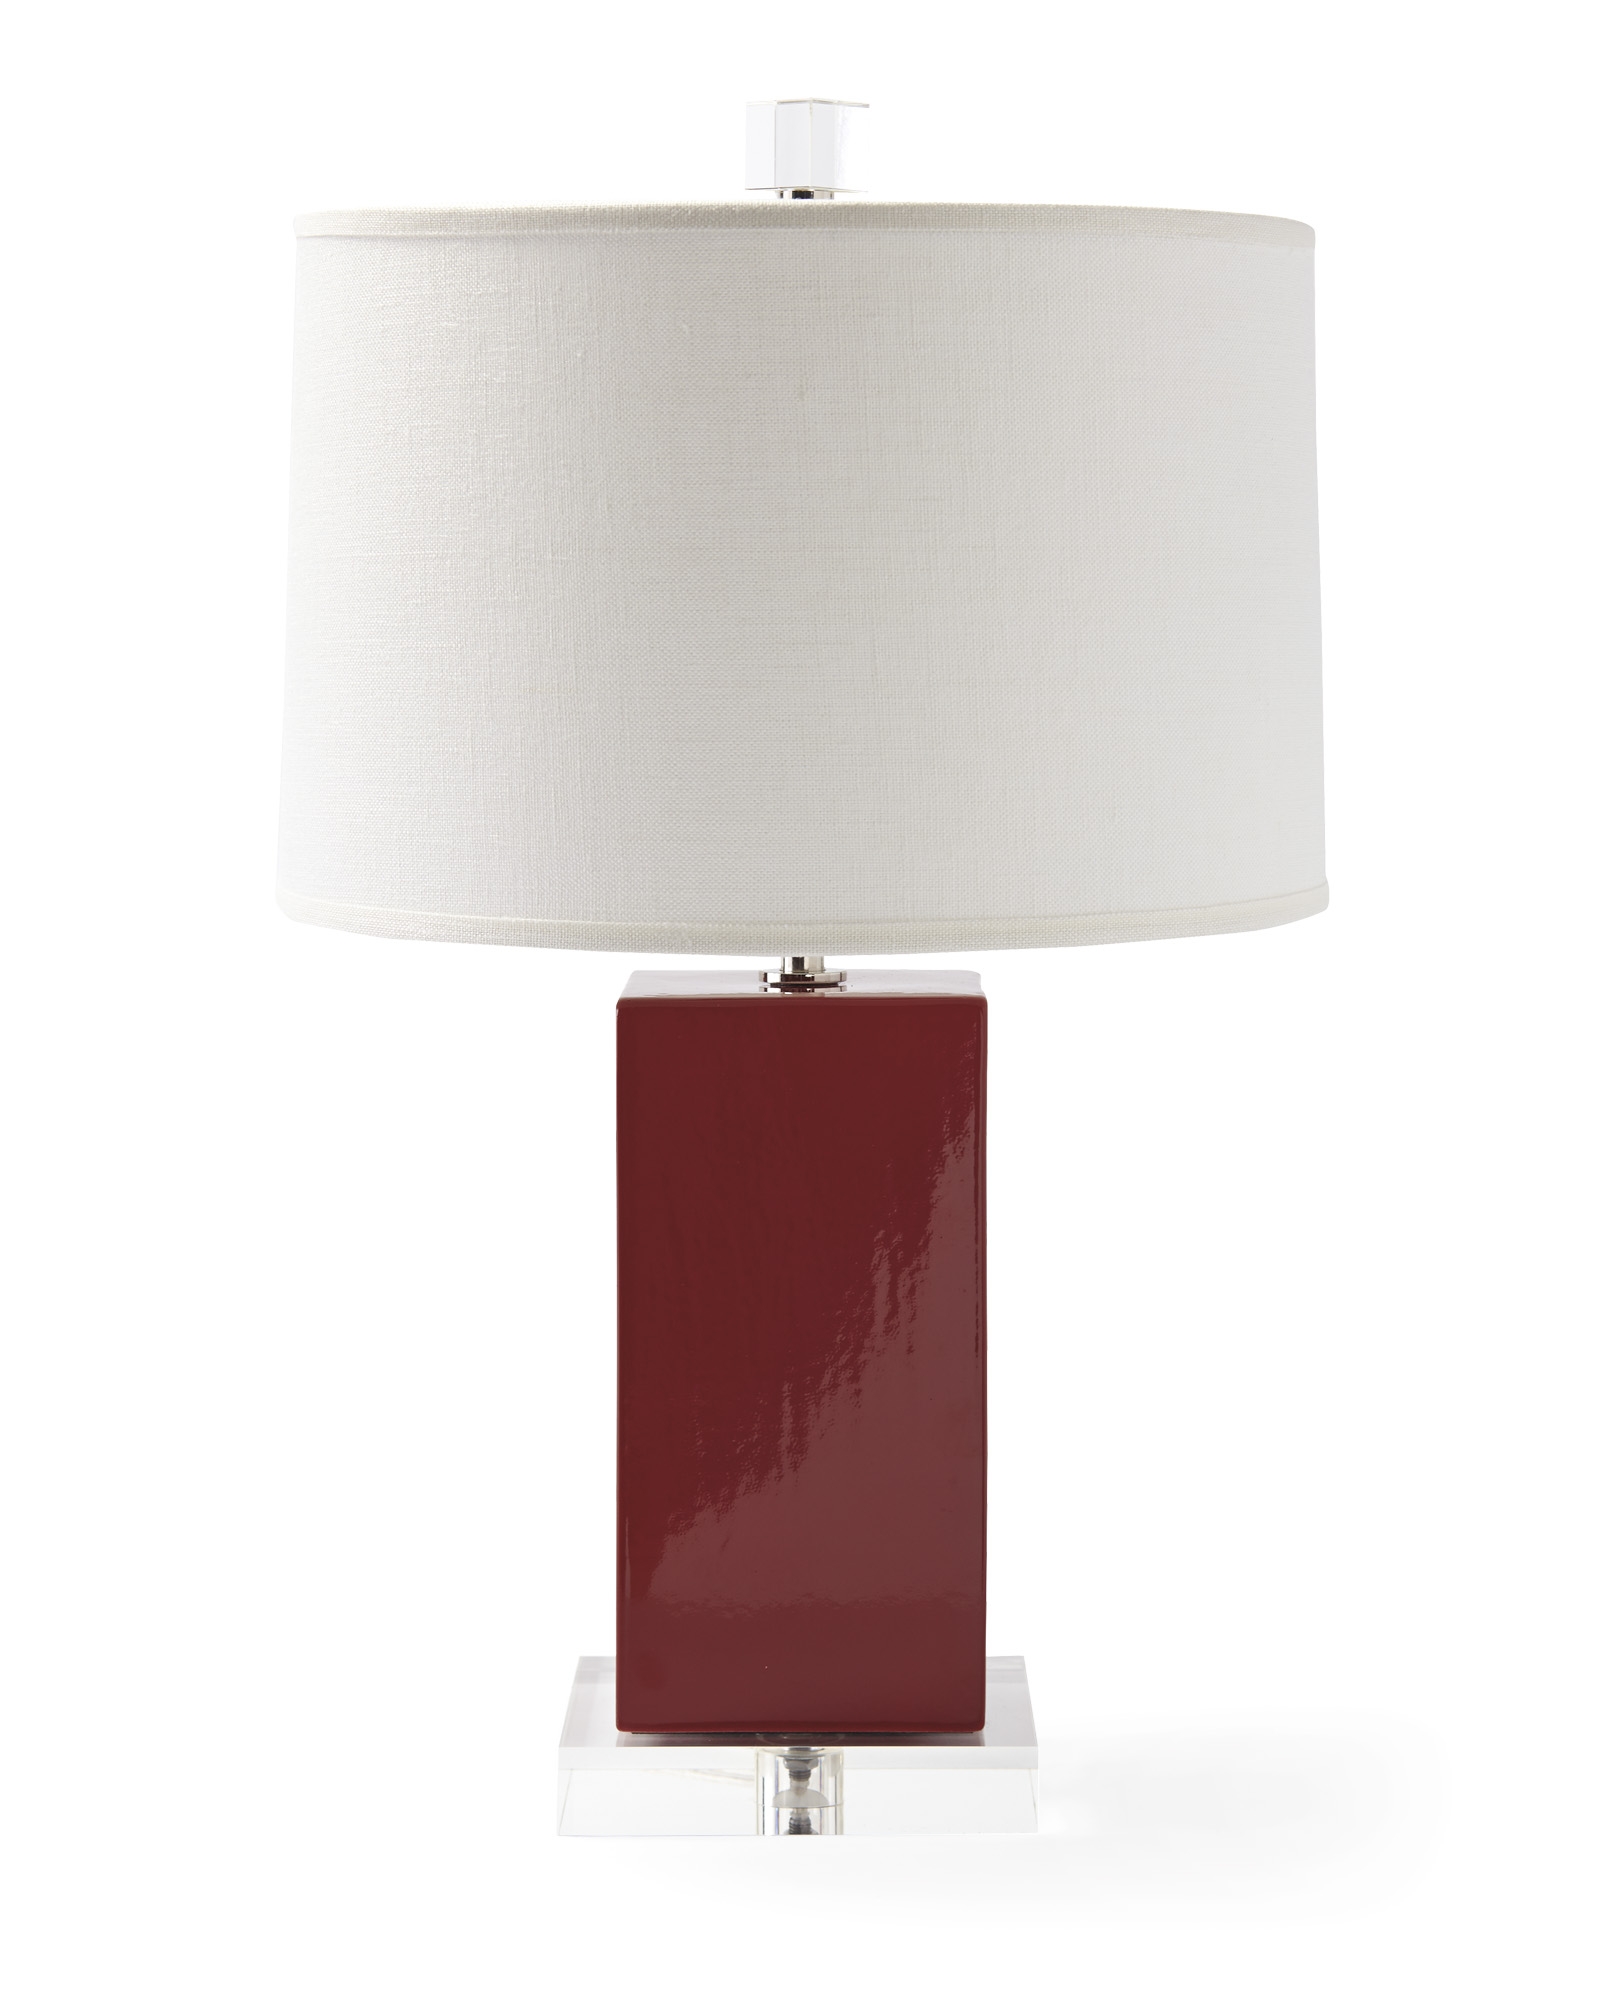 Darby Table Lamp - Image 0